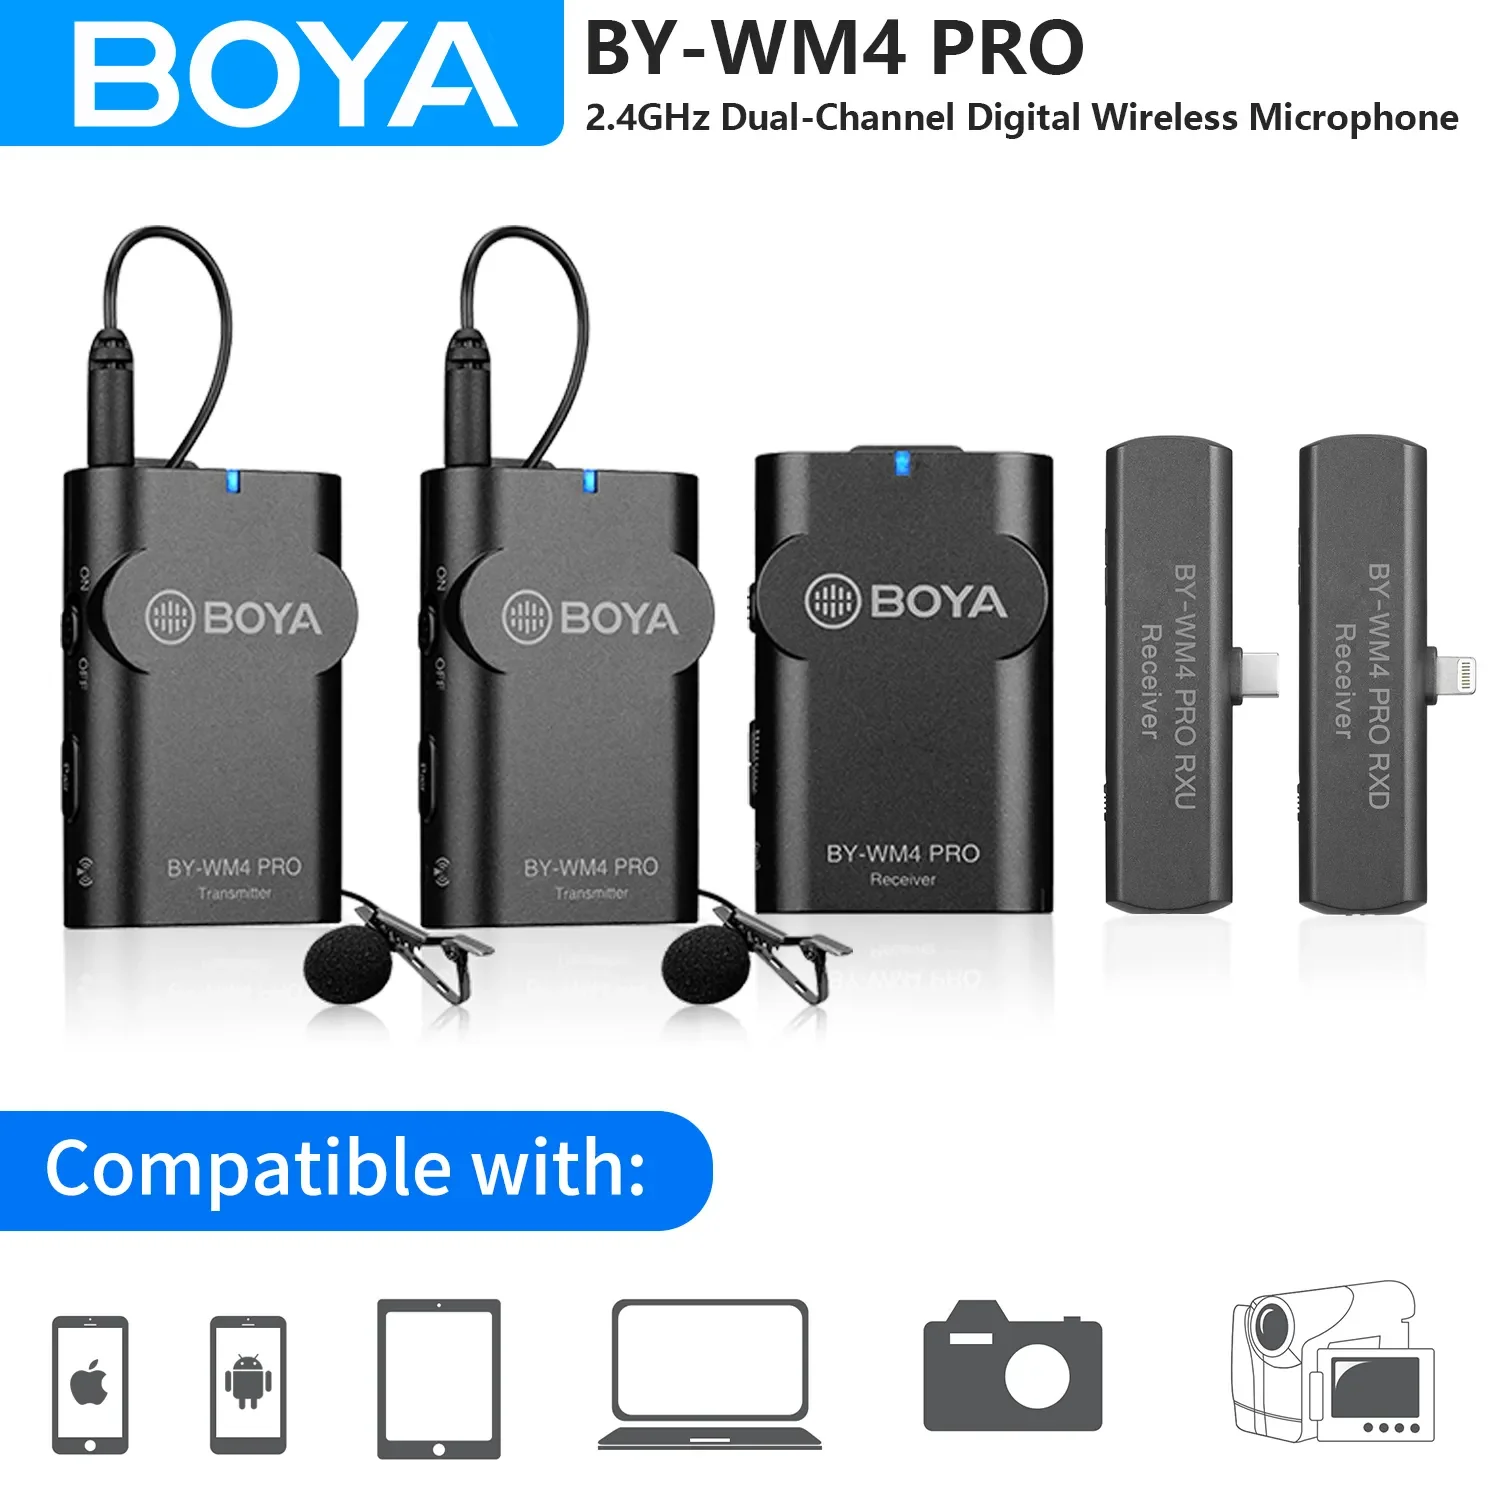 

BOYA BY-WM4 PRO Wireless Lavalier Lapel Microphone for iPhone Android Smartphone DSLR Cameras Youtube Recording Streaming Vlog